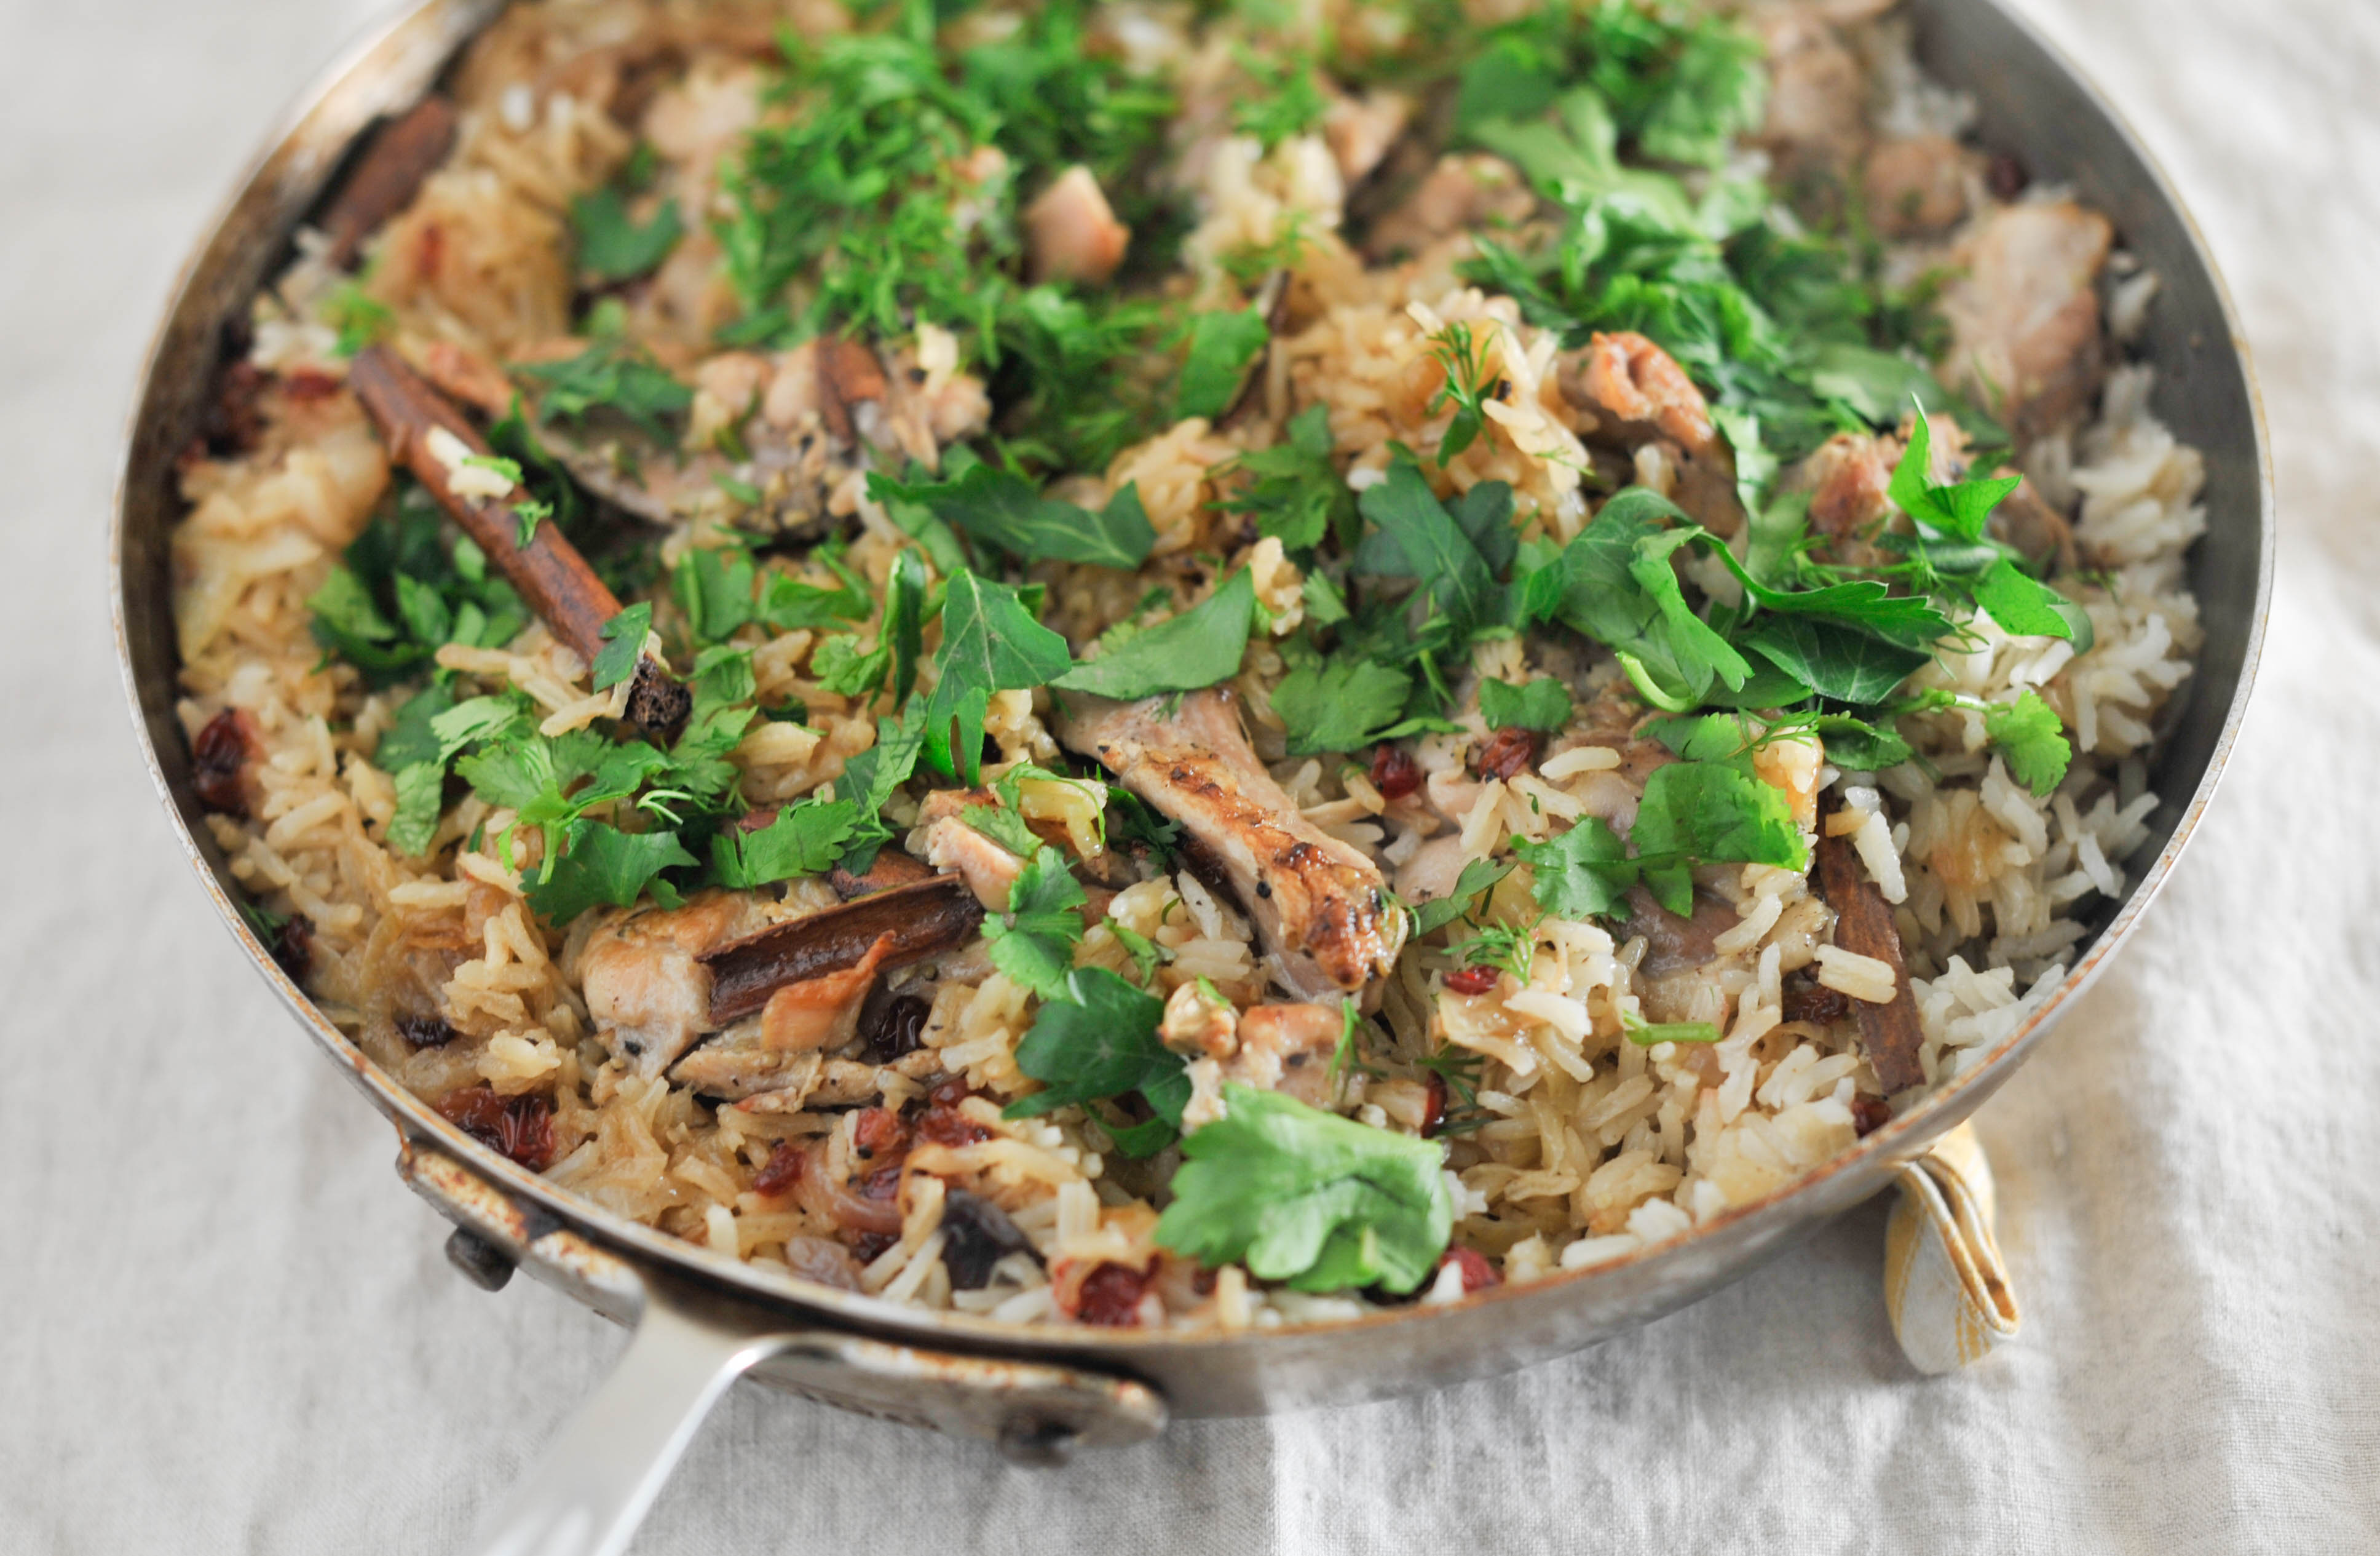 Ottolenghi Chicken with Cardamom Rice